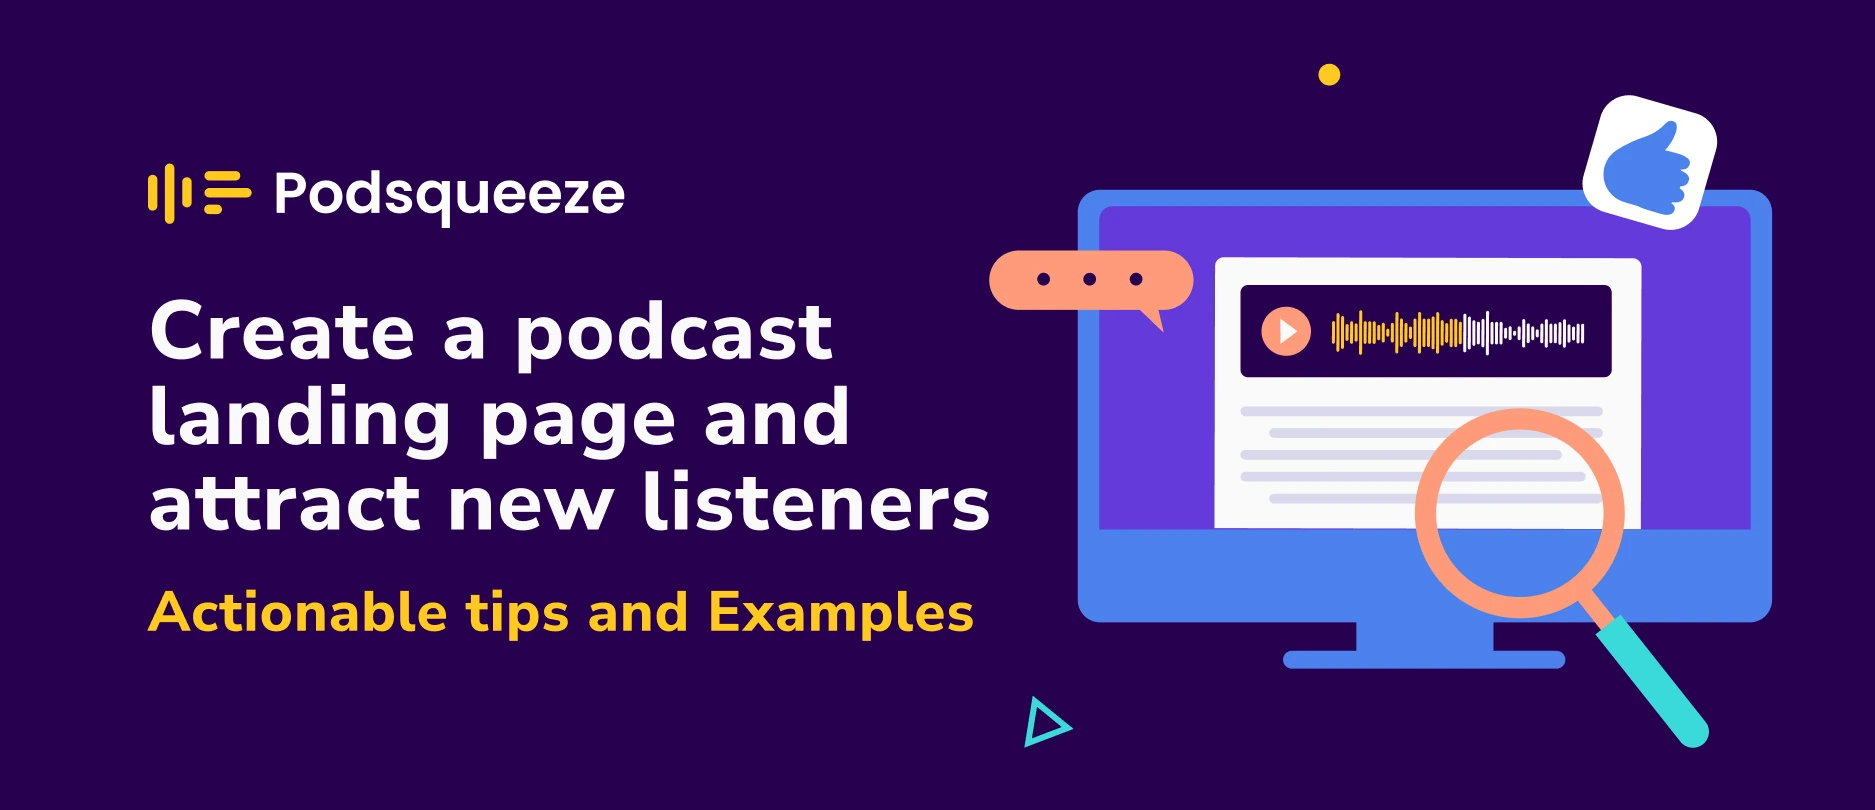 Create podcast landing page article cover